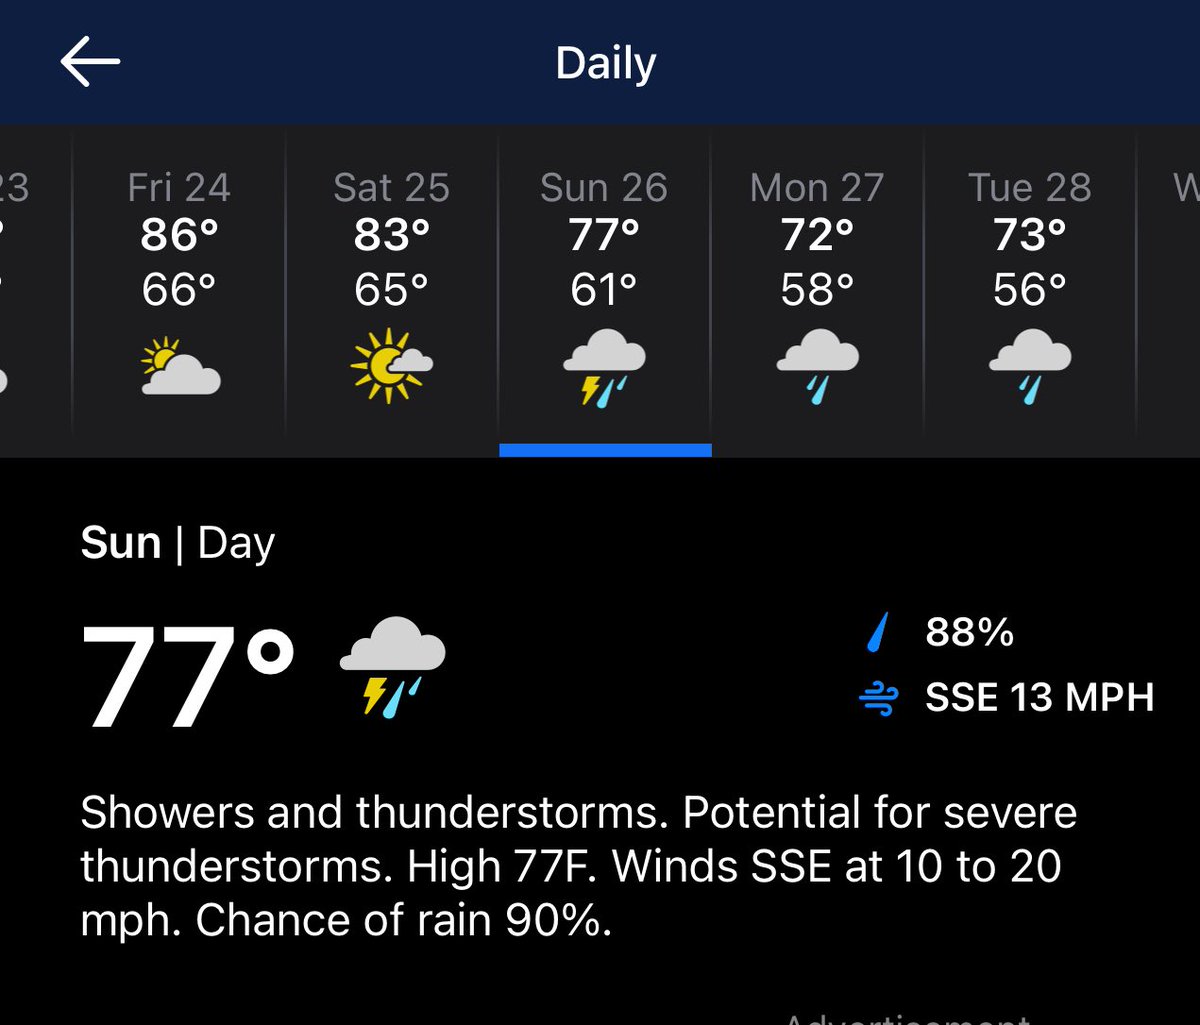 If it’s going to rain in Indy on Sunday do we want a washout or nah?